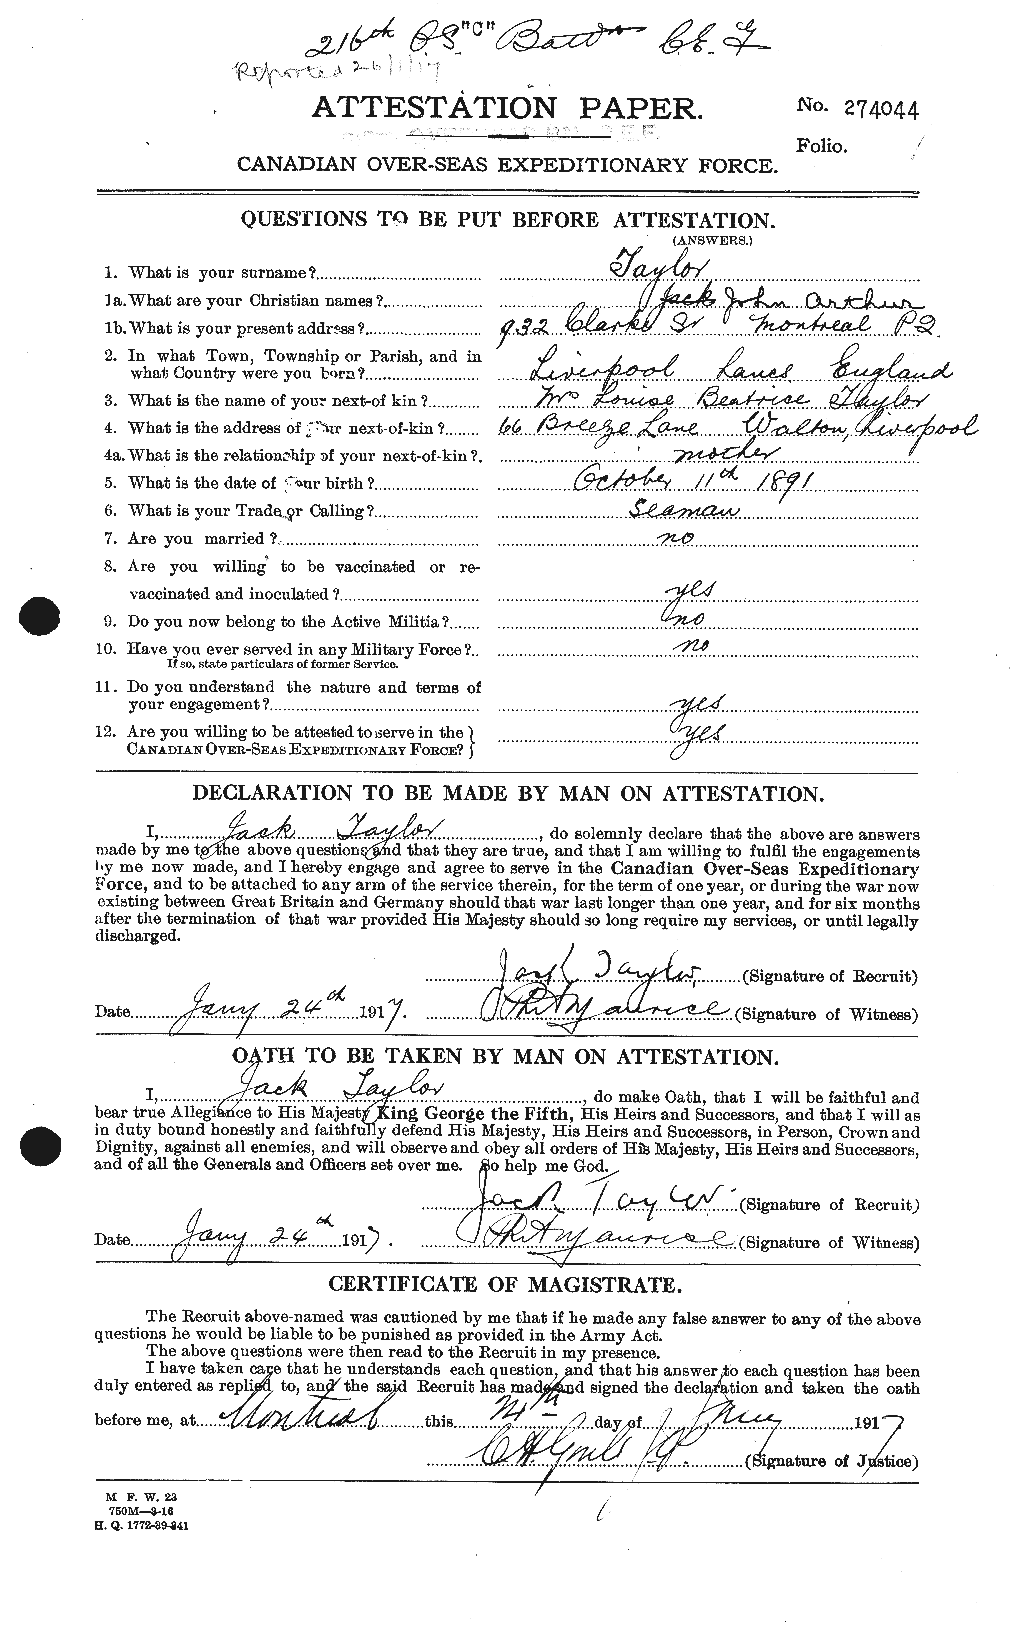 Personnel Records of the First World War - CEF 627050a